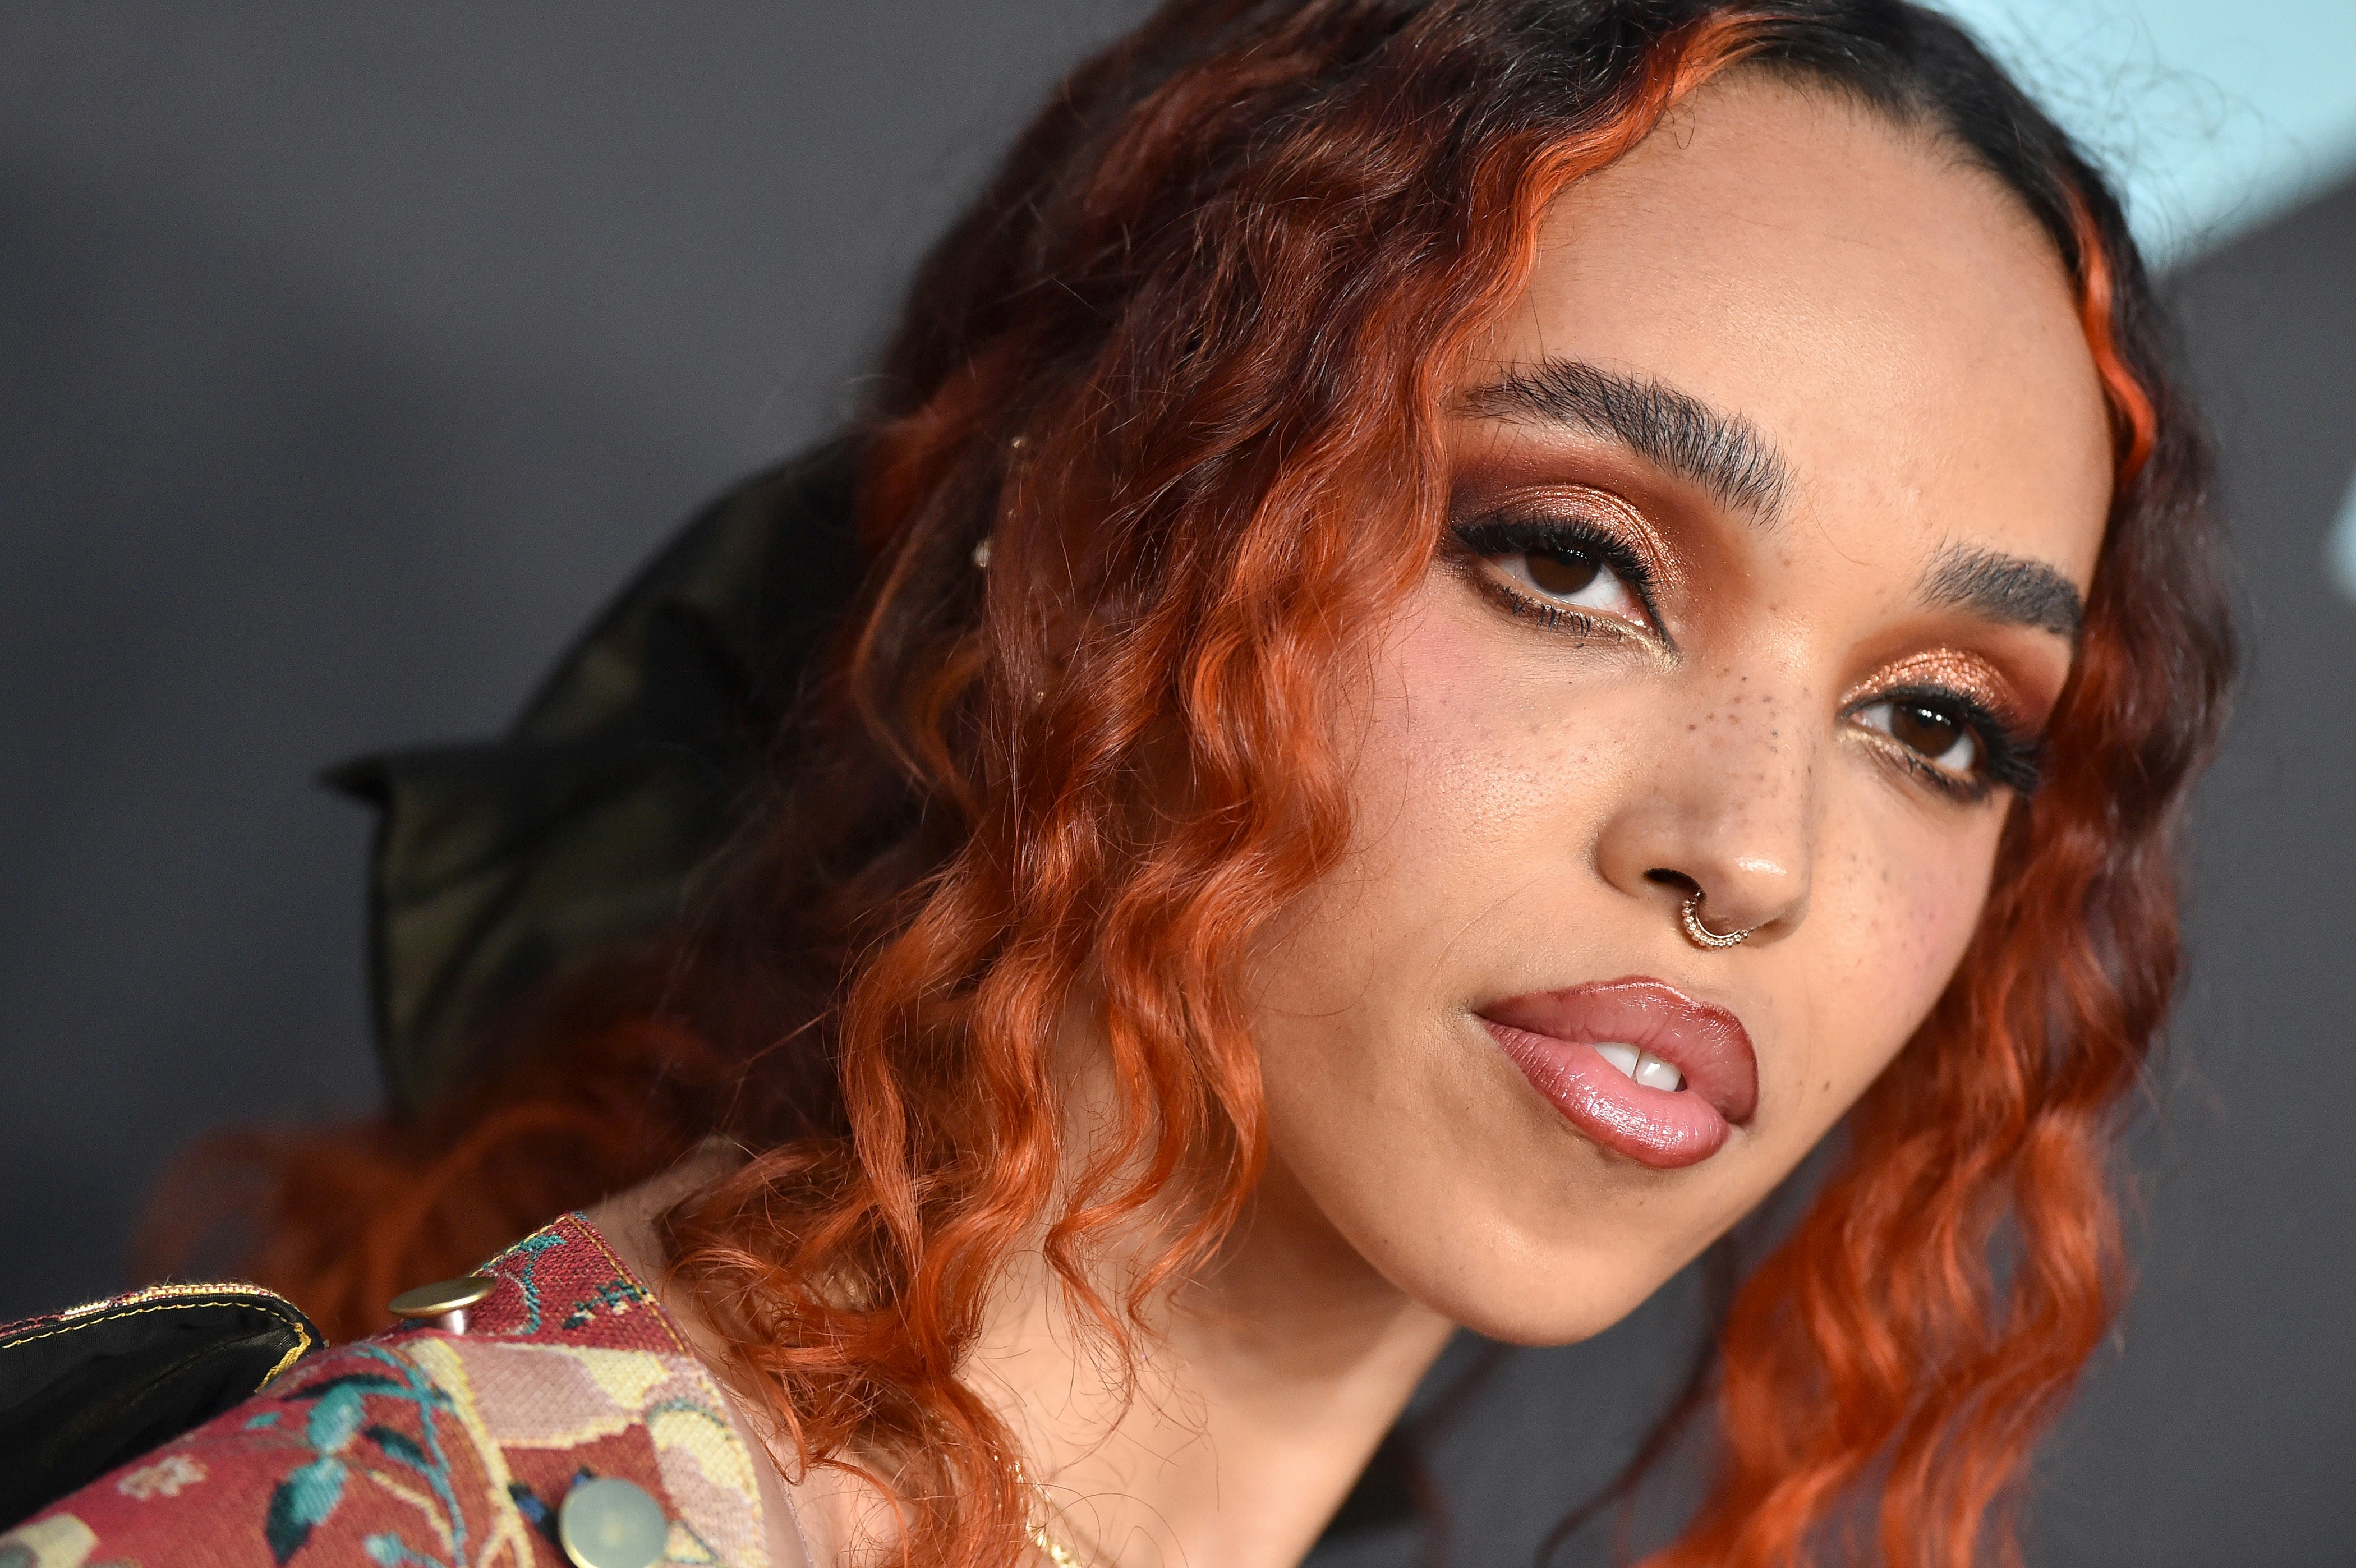 British Singer FKA Twigs Talks Music and Those Famous Baby Hairs